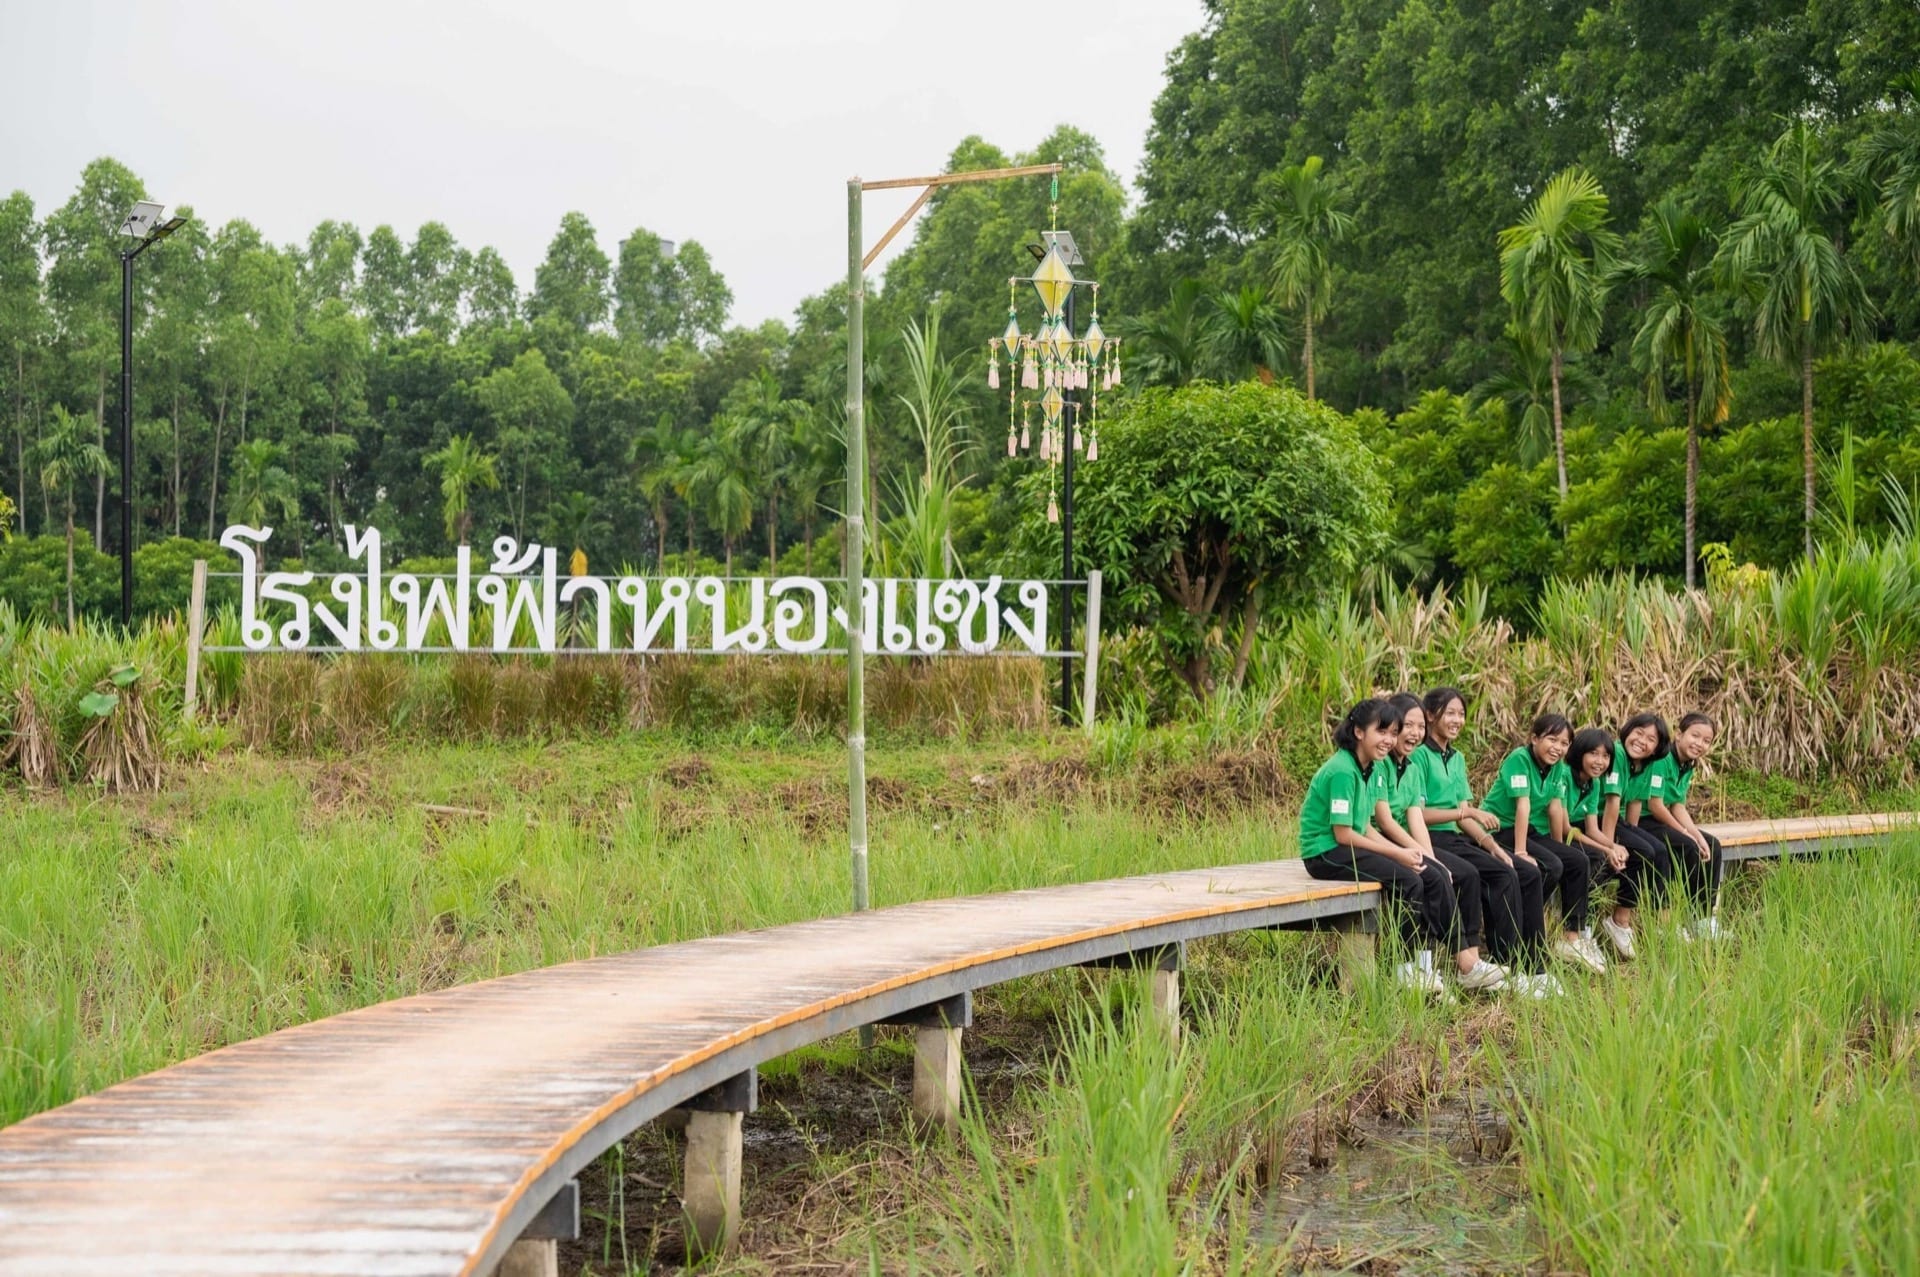 GULF Showcases Nong Saeng Agricultural Learning Center 